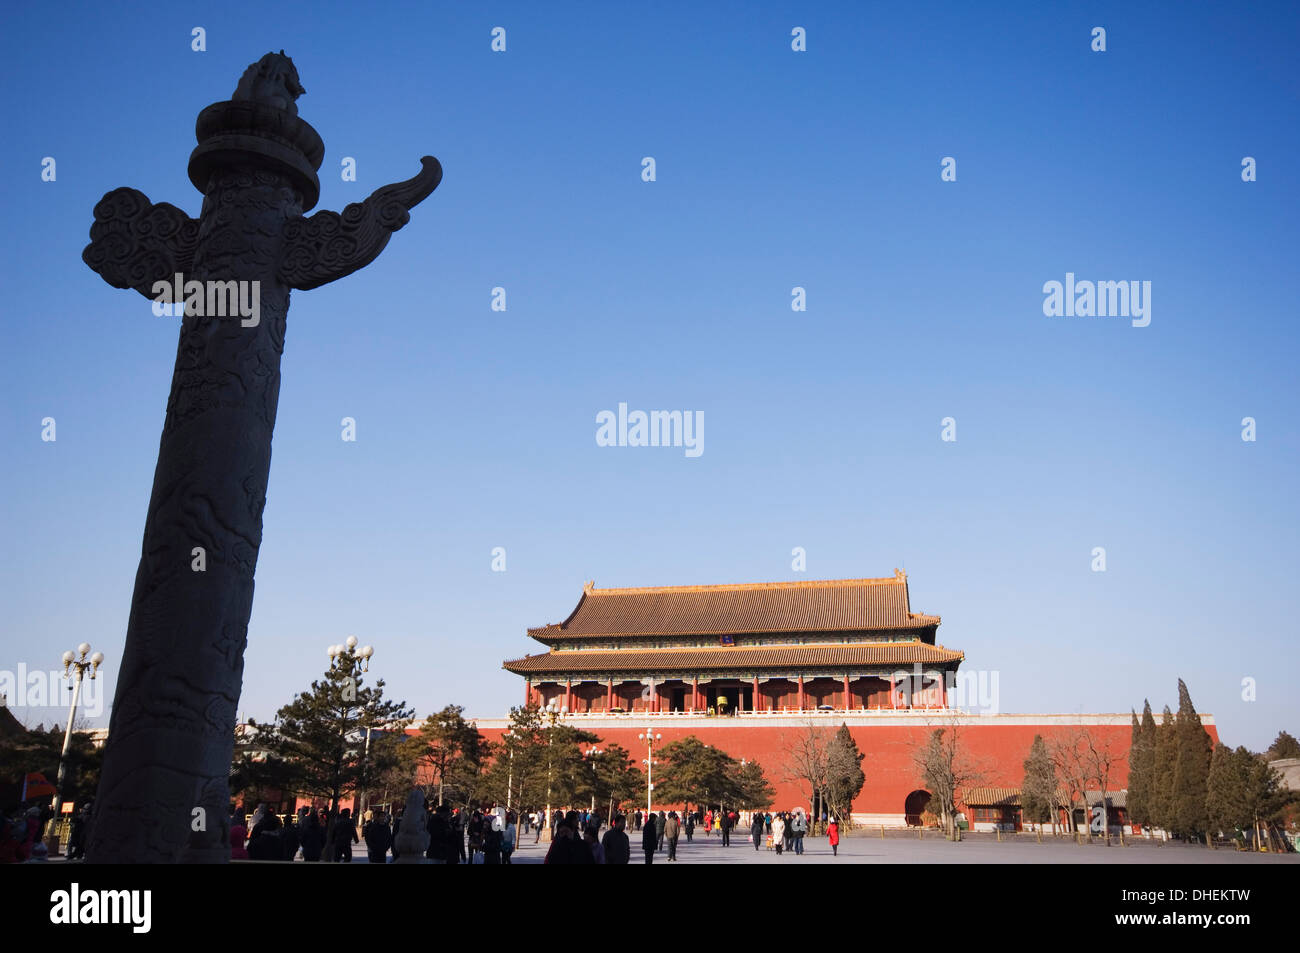 a Huabiao statue infront of the Forbidden City Beijing China Stock Photo